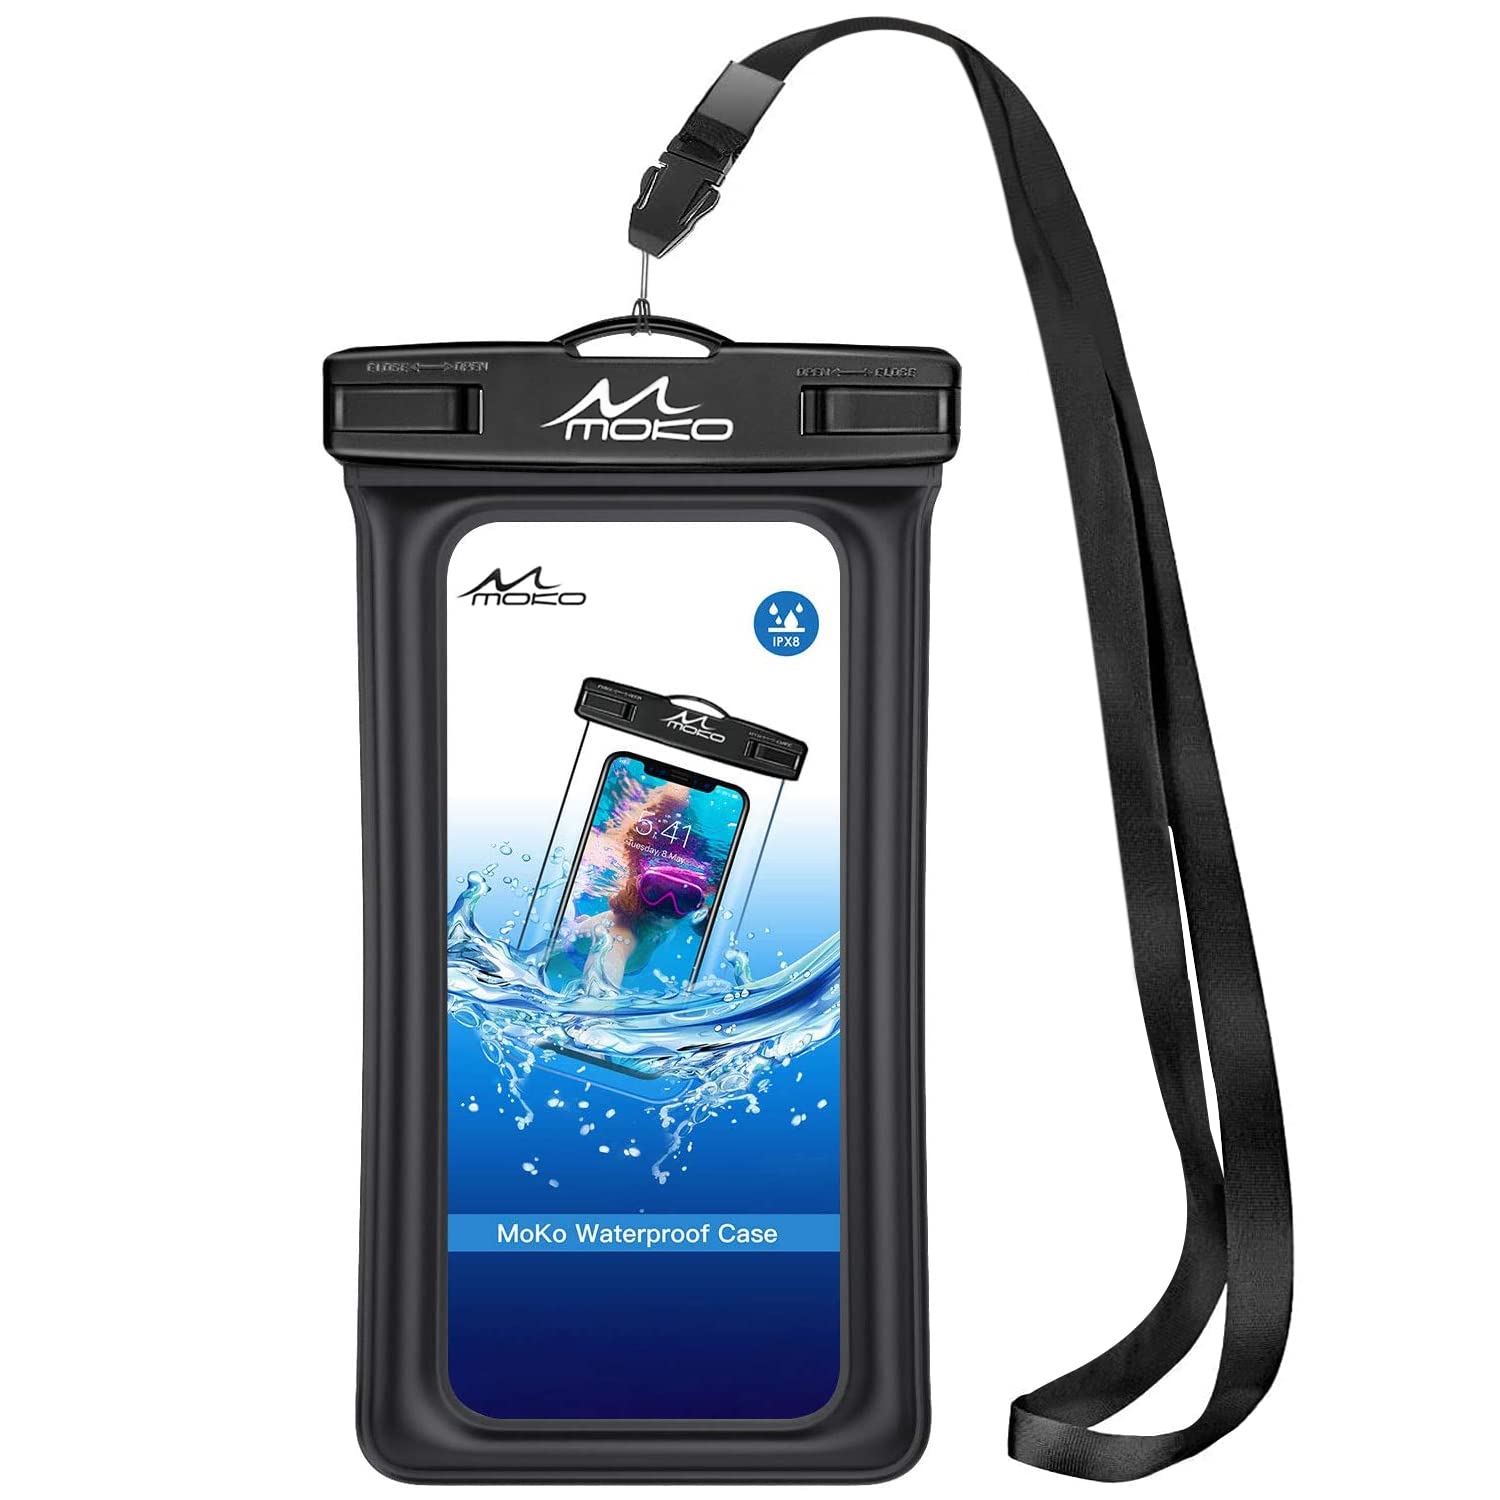 paddleboard-essentials-choosing-the-right-waterproof-holder-for-your-phone